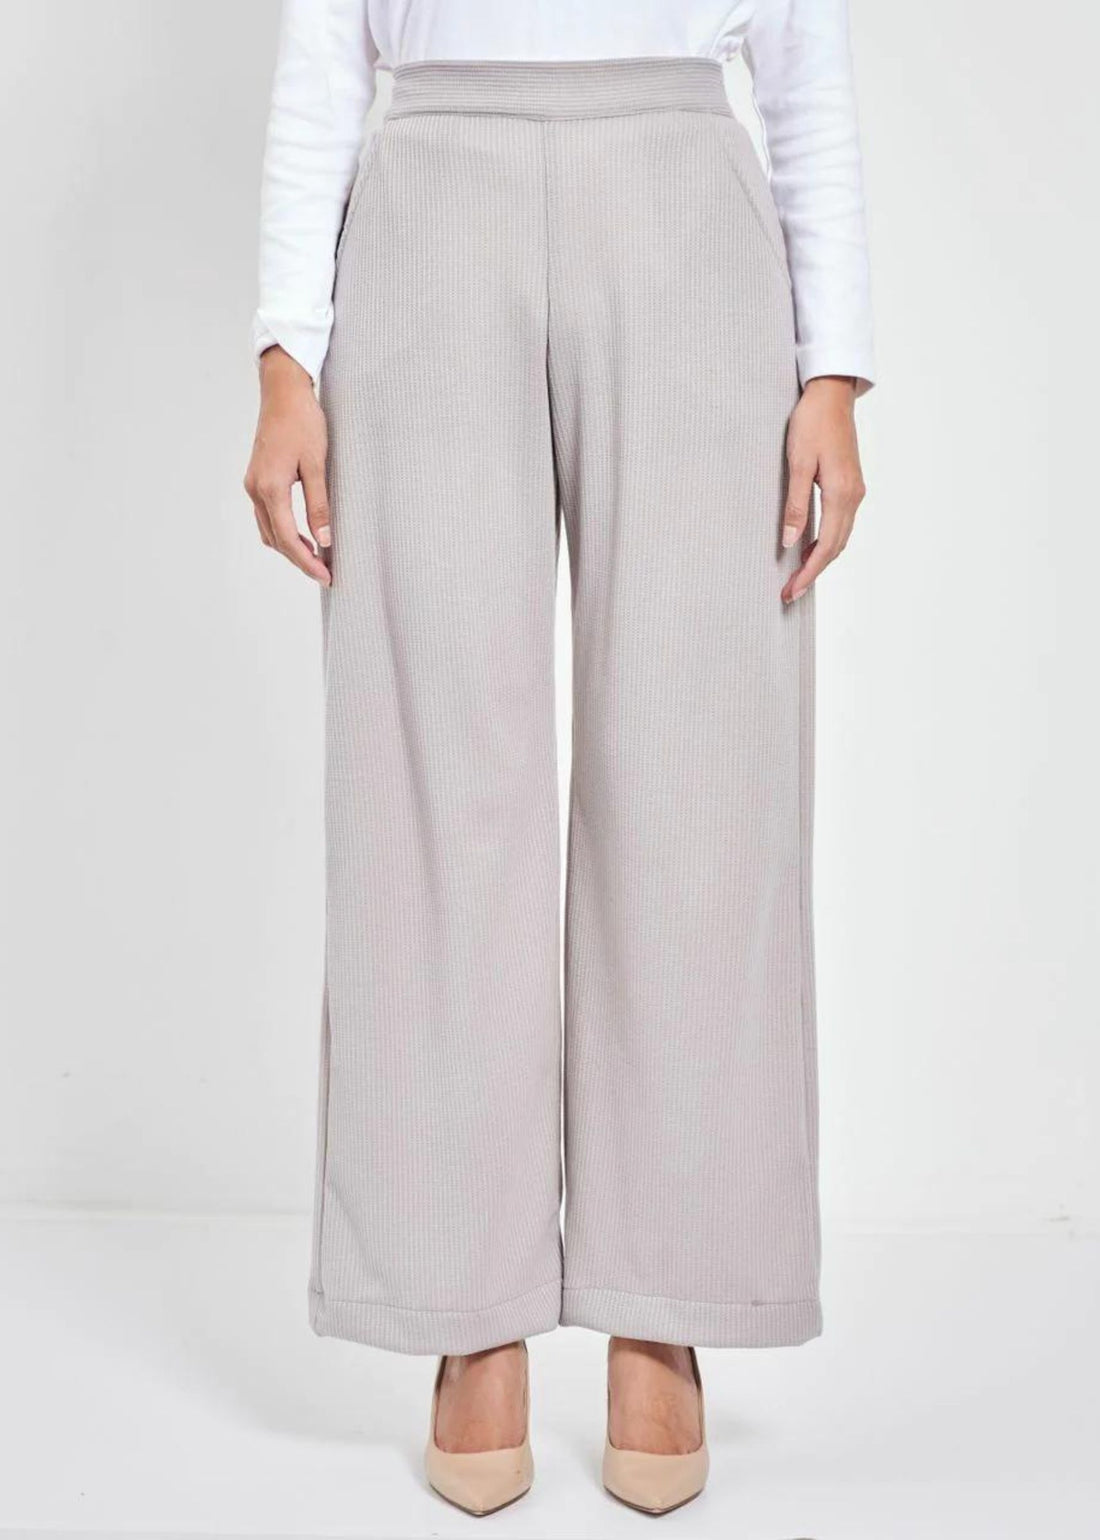 DONNA Straight Cut Pants in Grey